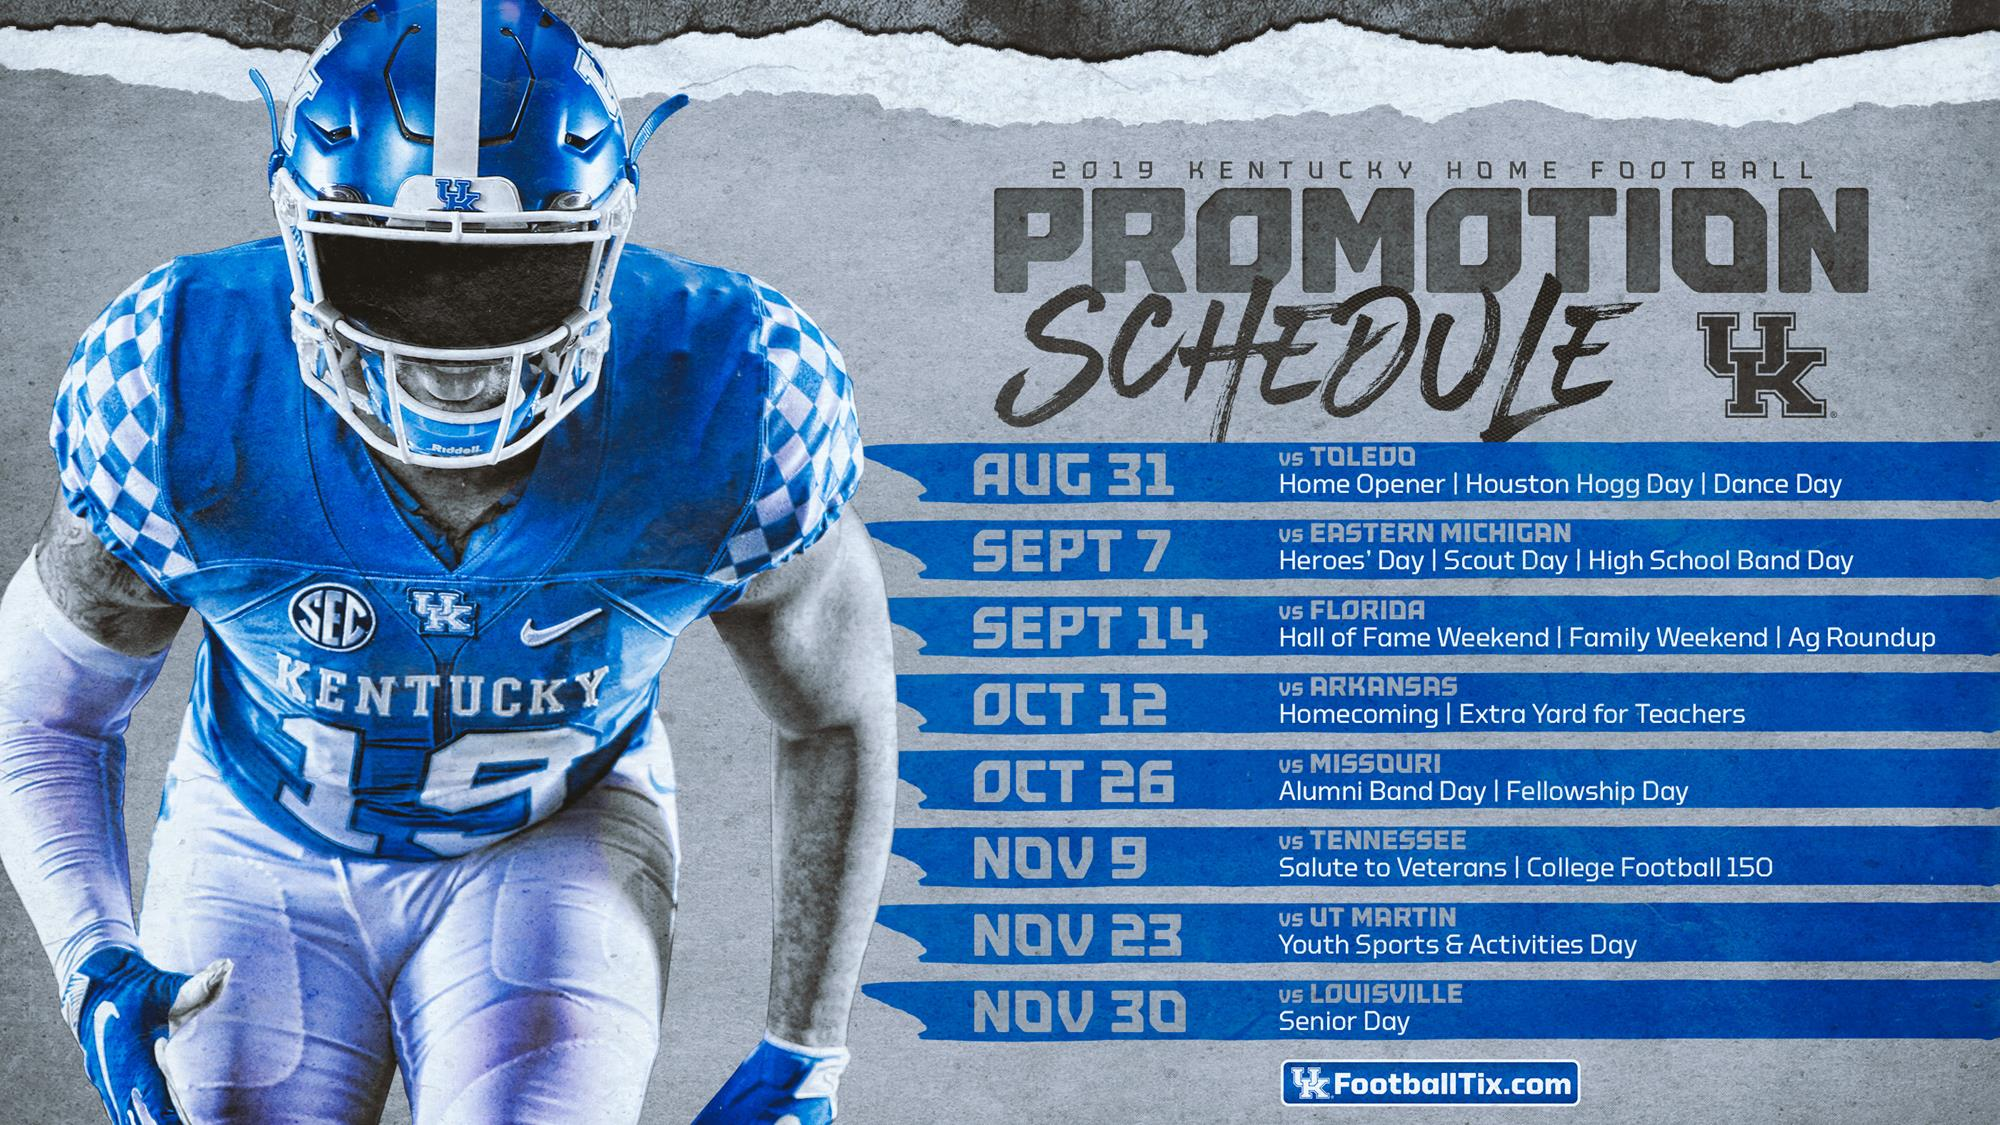 Promotional Schedule Announced for 2019 UK Football Season